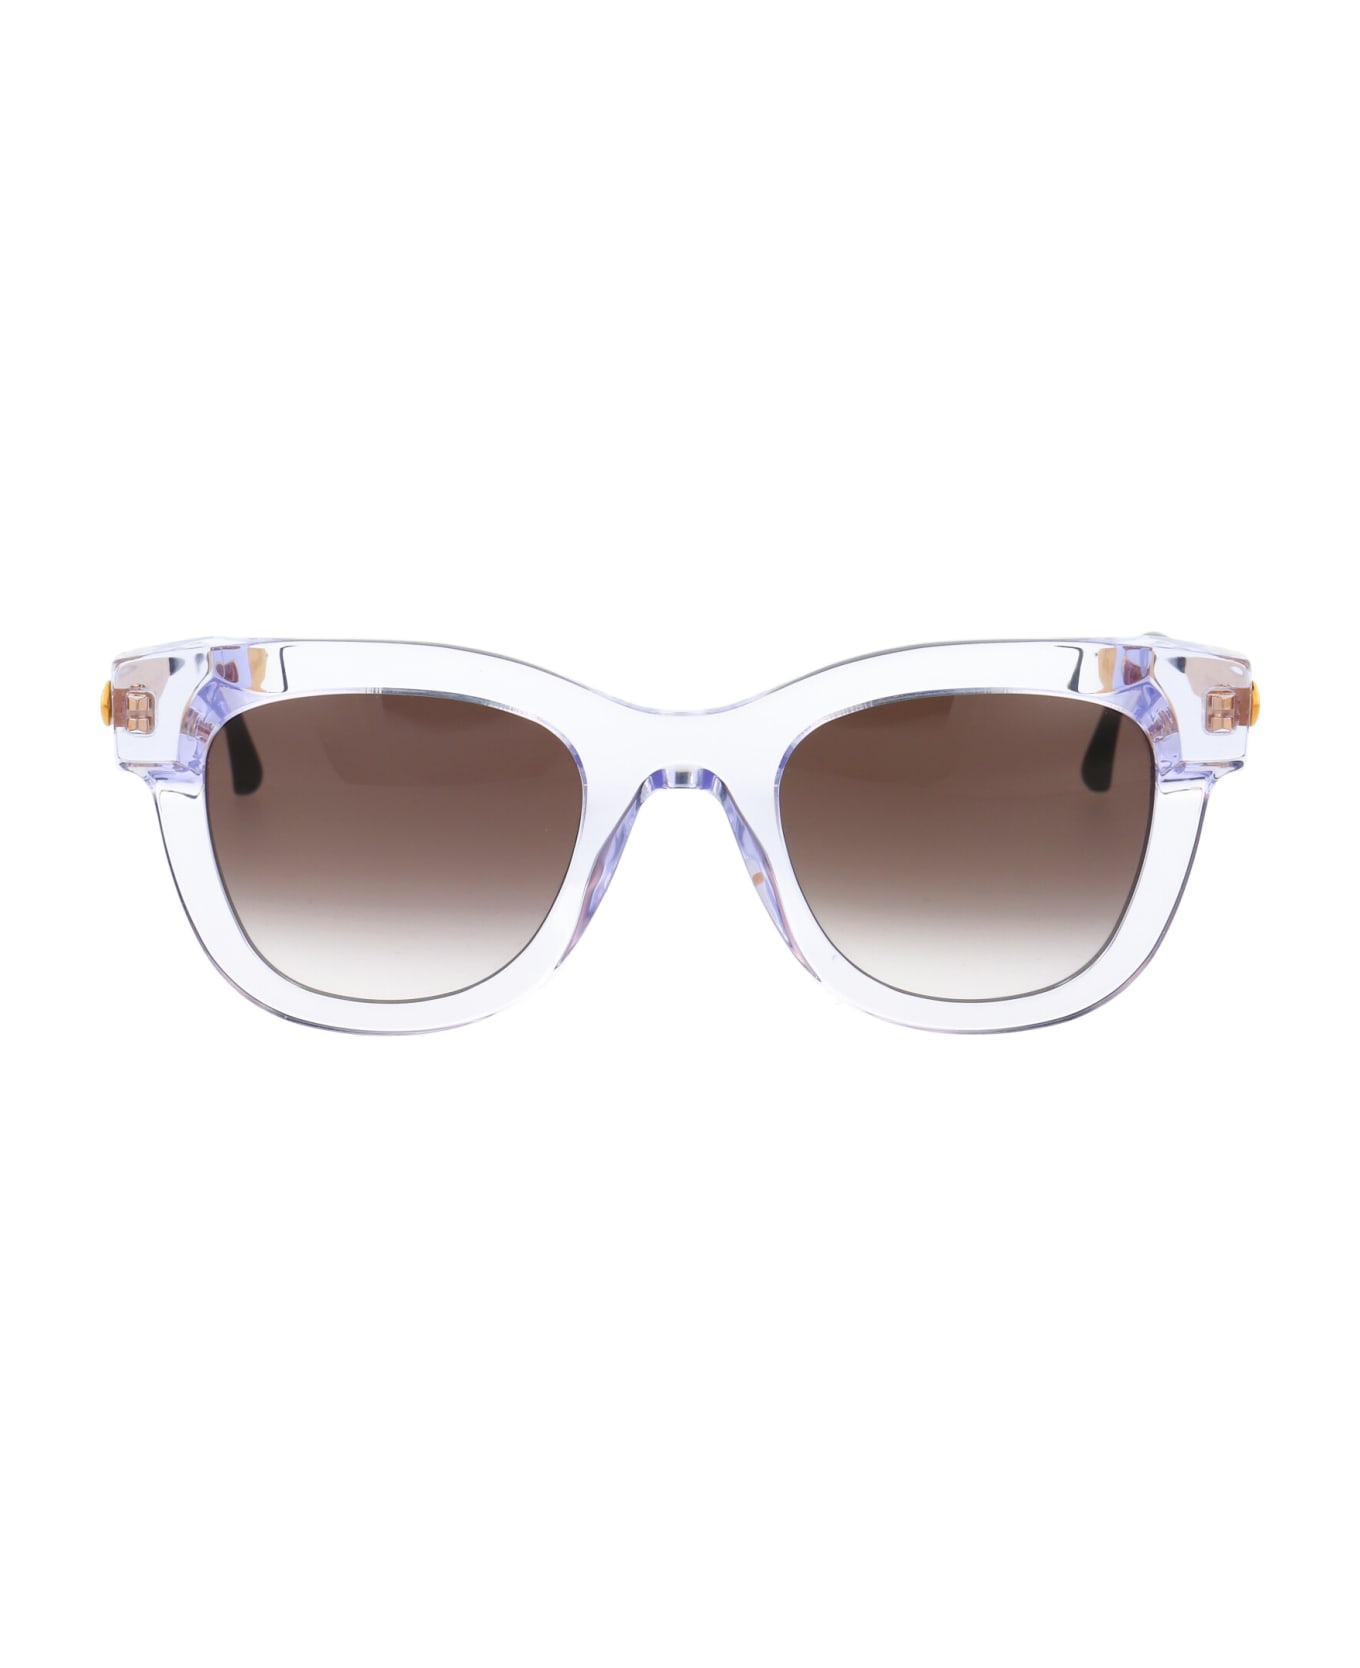 Thierry Lasry Sexxxy Sunglasses - 00 CRYSTAL サングラス